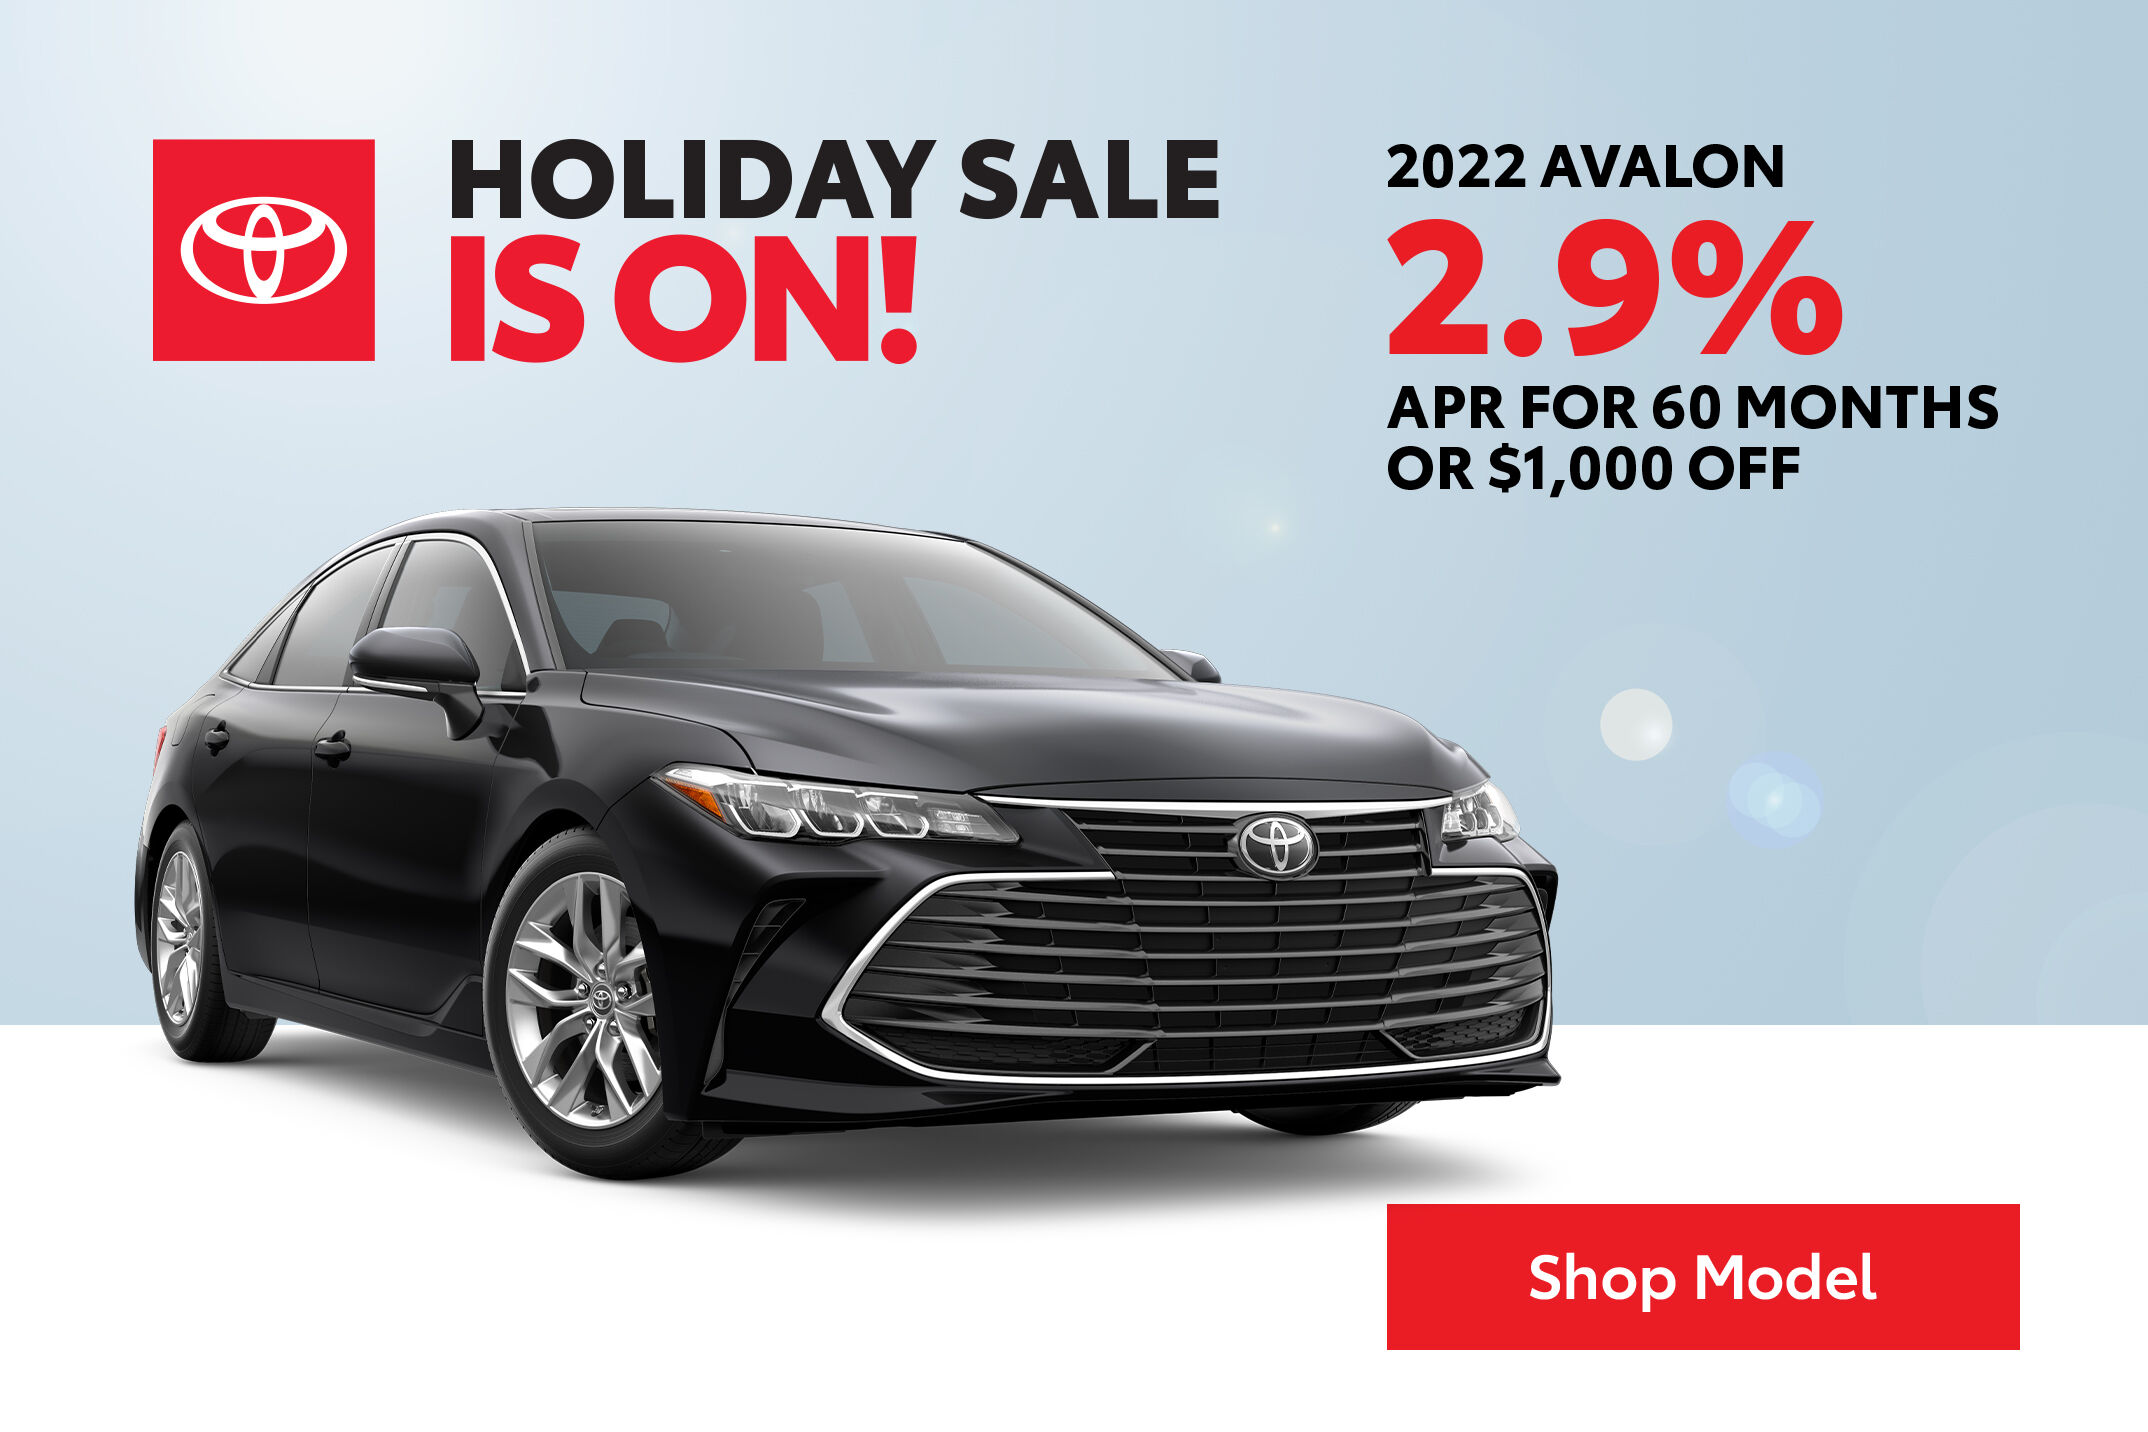 Holiday Sale - 2022 Avalon - 2.9% APR for 60 months or $1,000 off